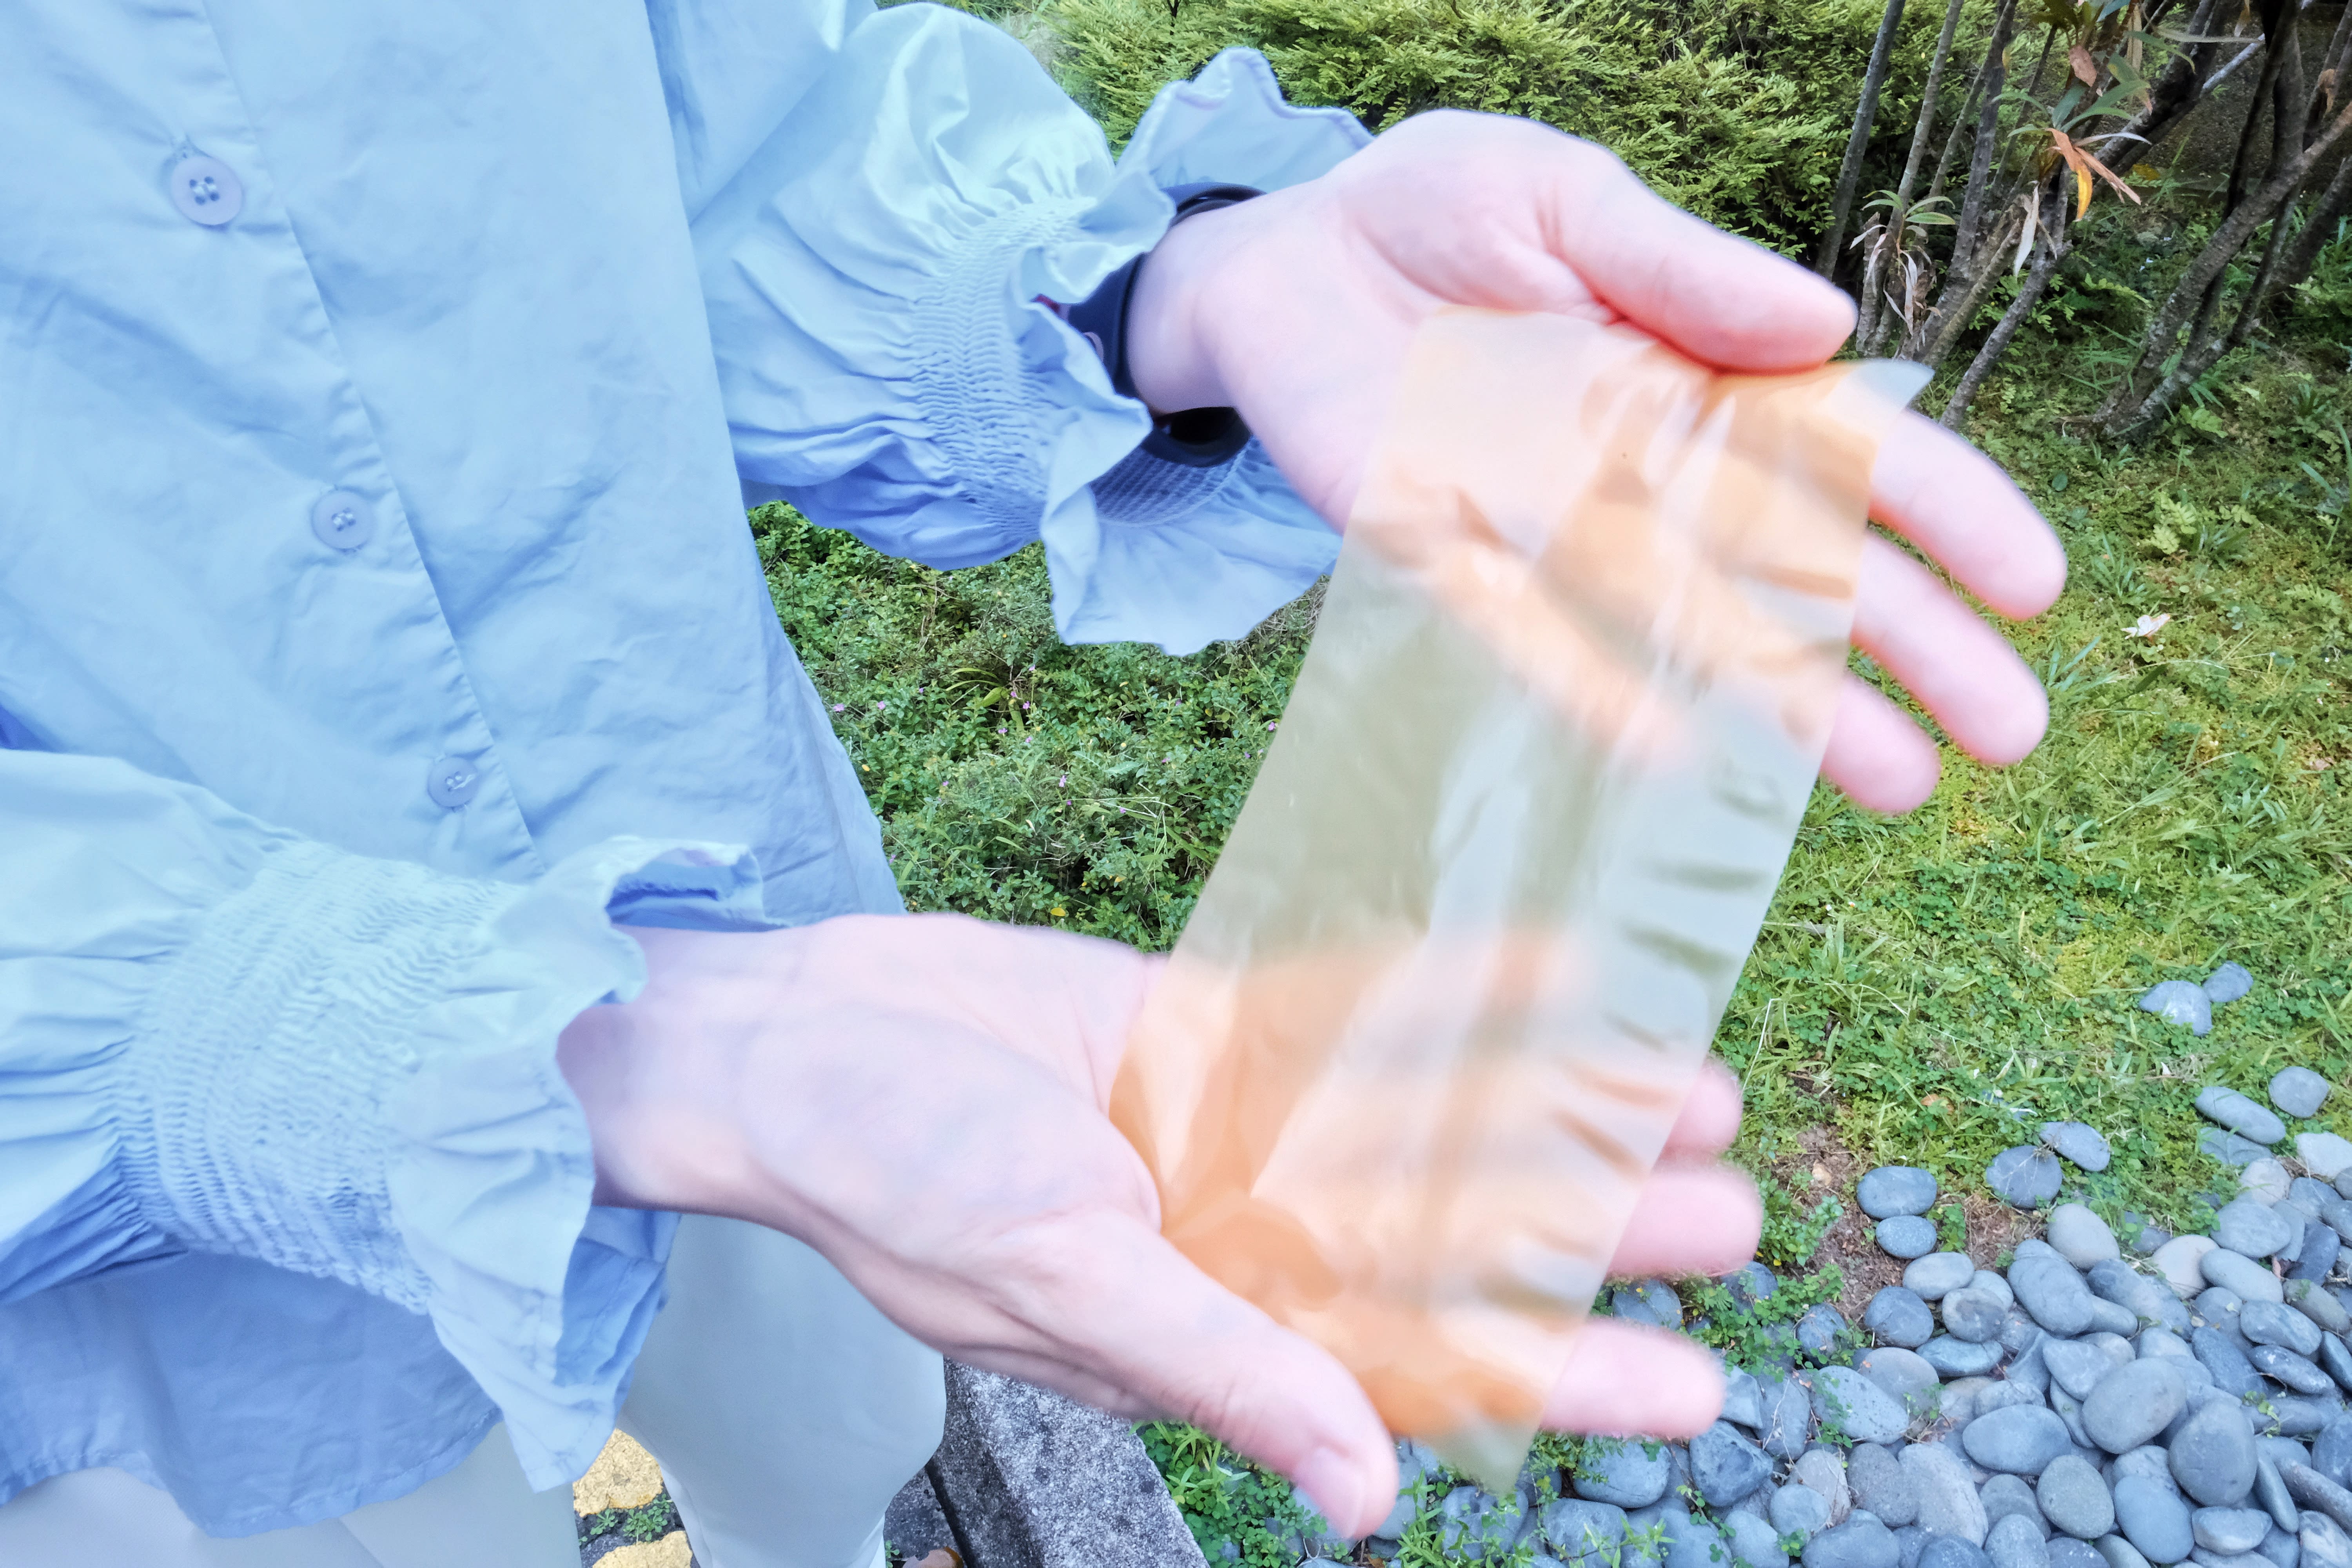 NTU scientists say their eco-friendly reusable pollen-based paper could be alternative to conventional paper